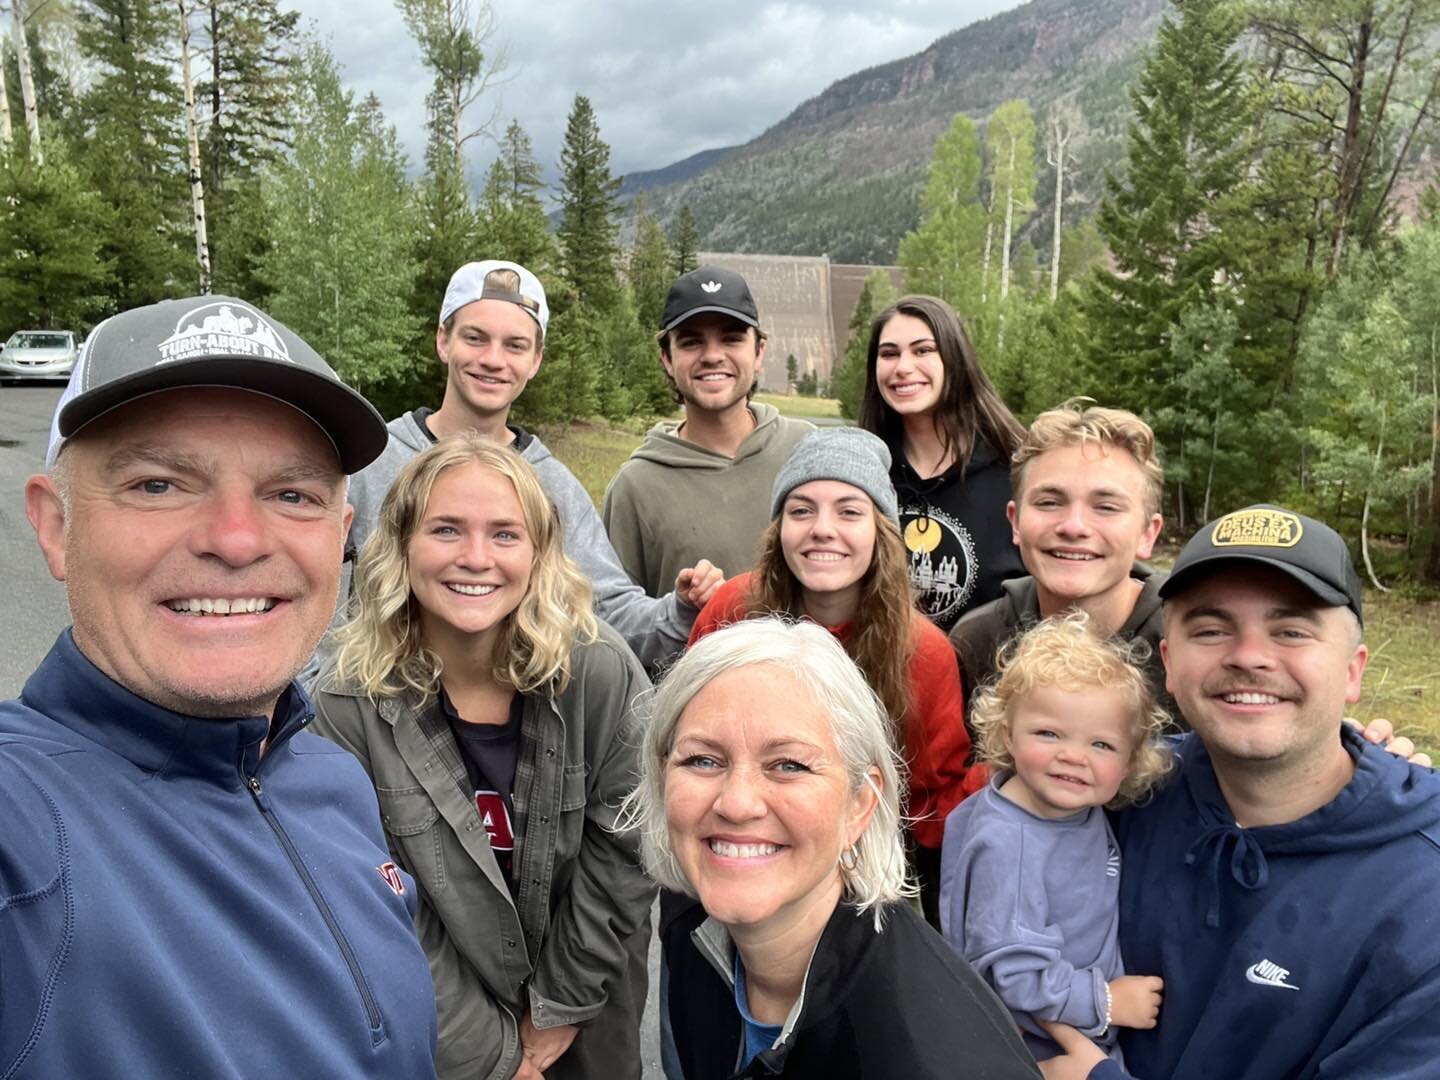 Camping with this gang makes the pouring rain, swimming in cold reservoirs, forgotten items, &ldquo;boom roasted&rdquo; sessions at the campfire, and so much laughter a reason for gratitude!  Also!  Do not accept any direct messages from me in the pa